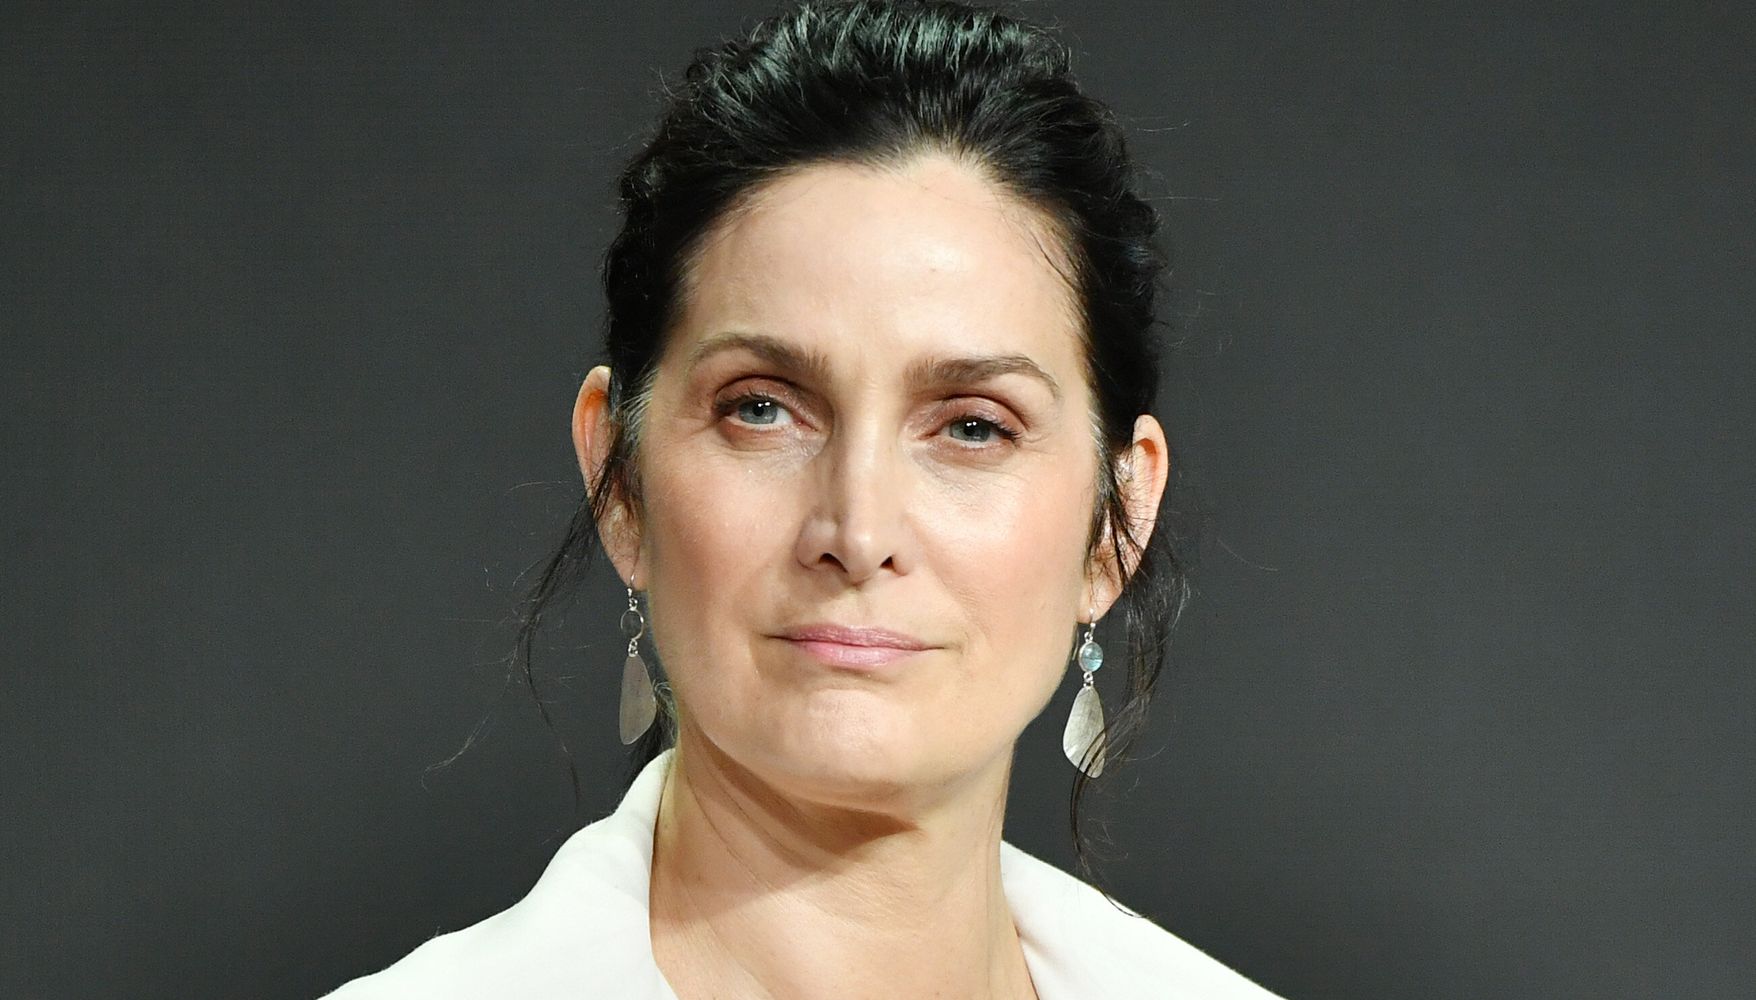 Carrie-Anne Moss’ Plastic Surgery – What We Know So Far